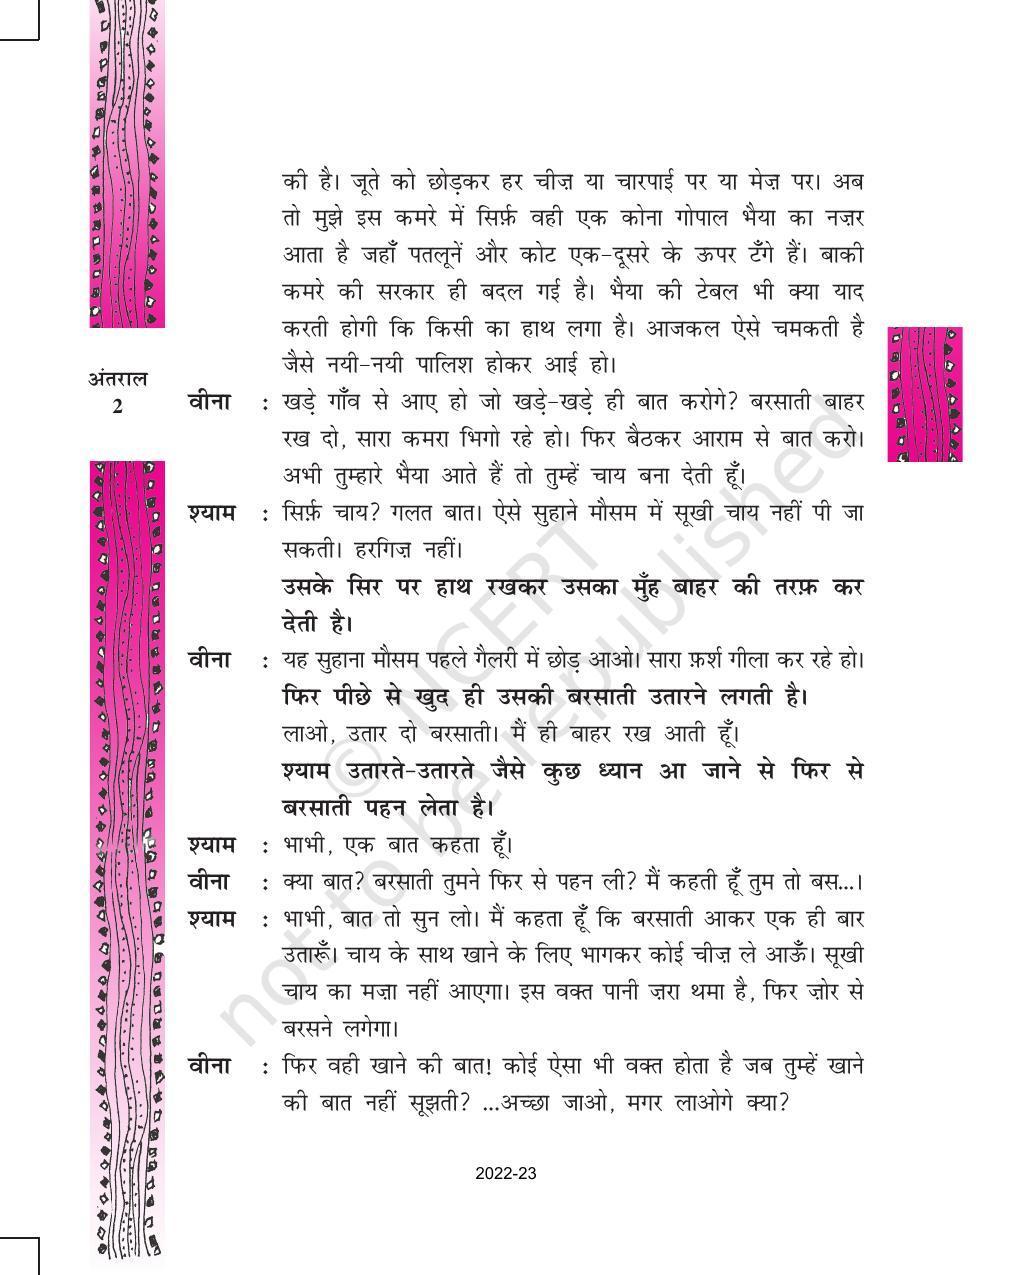 NCERT Book for Class 11 Hindi Antral Chapter 1 अंडे के छिलके - Page 2